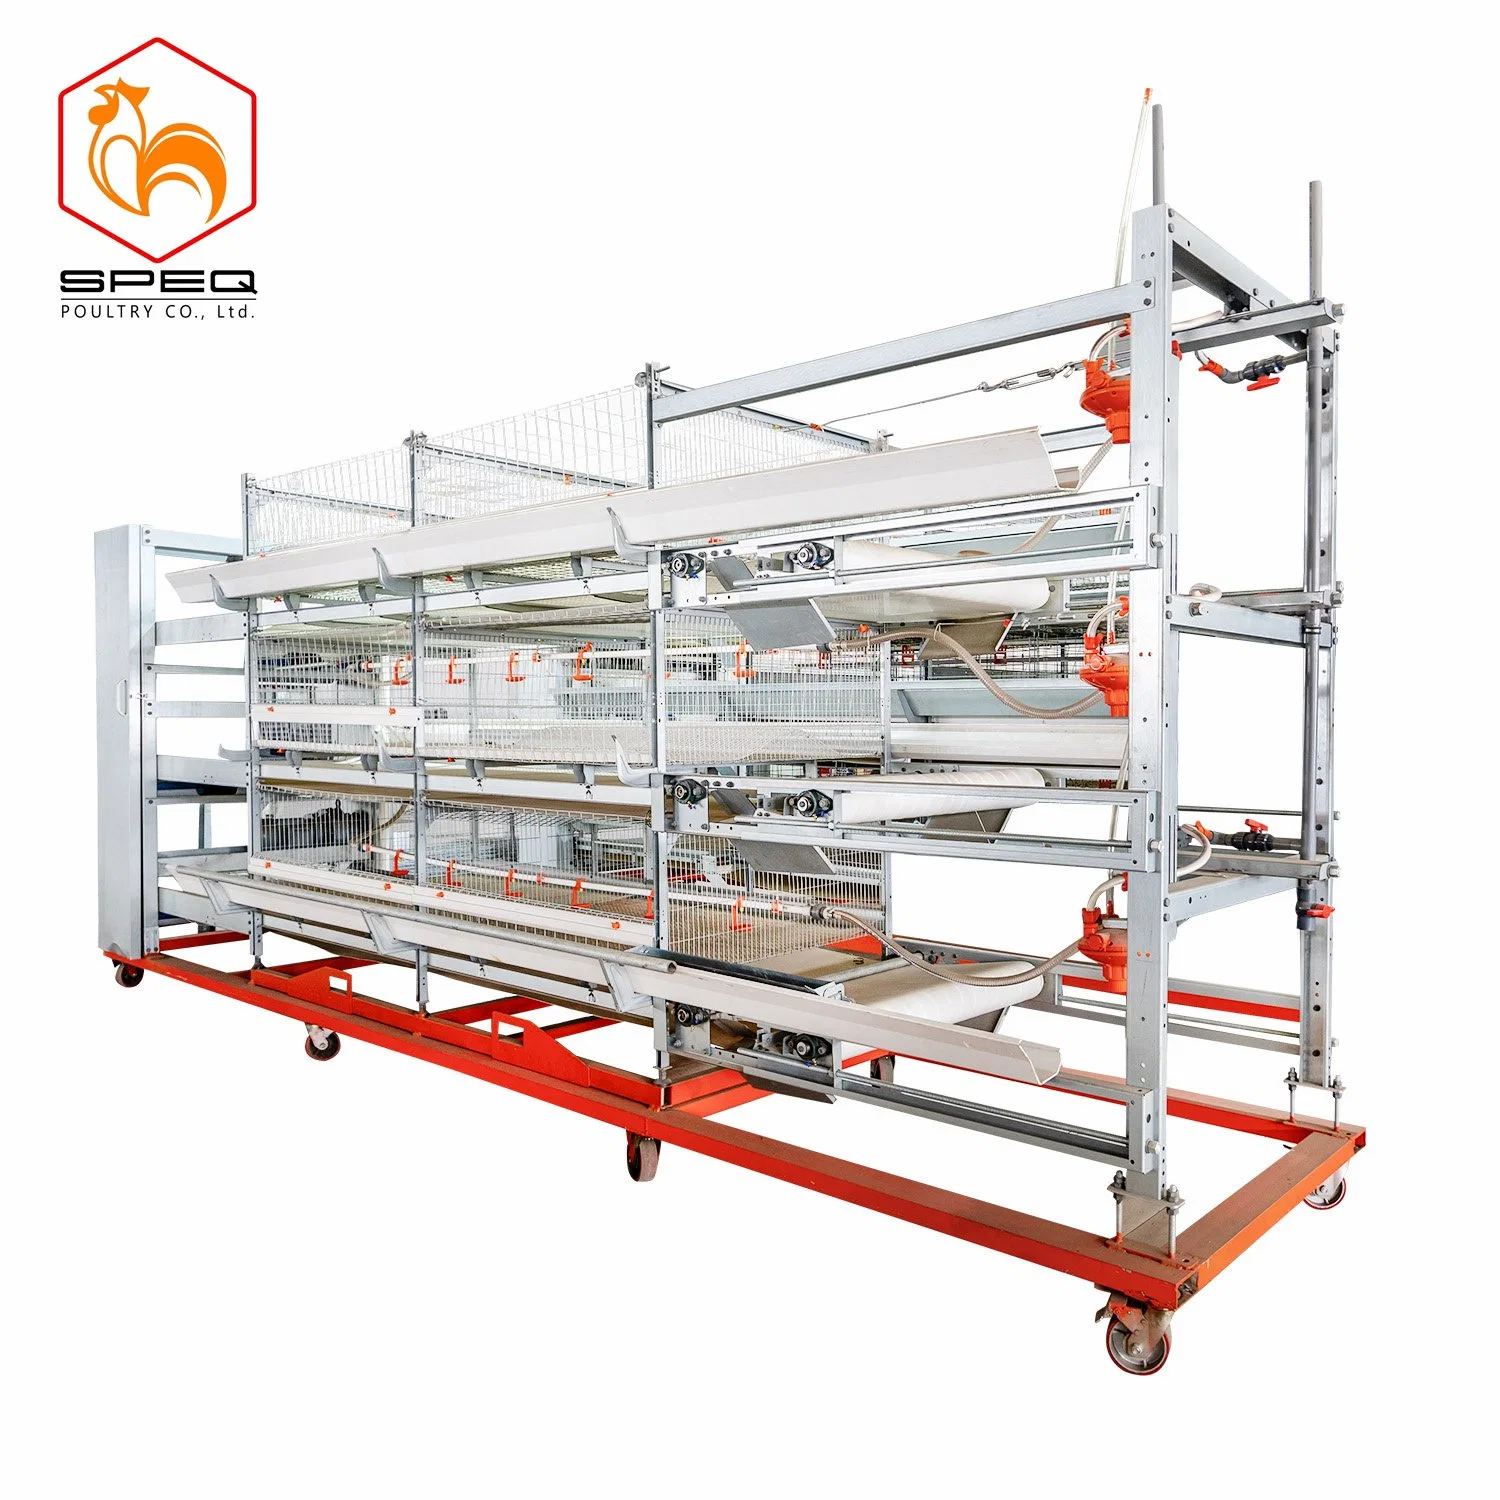 Livestock Poultry Farming Equipment Automatic Battery Cage for Broiler